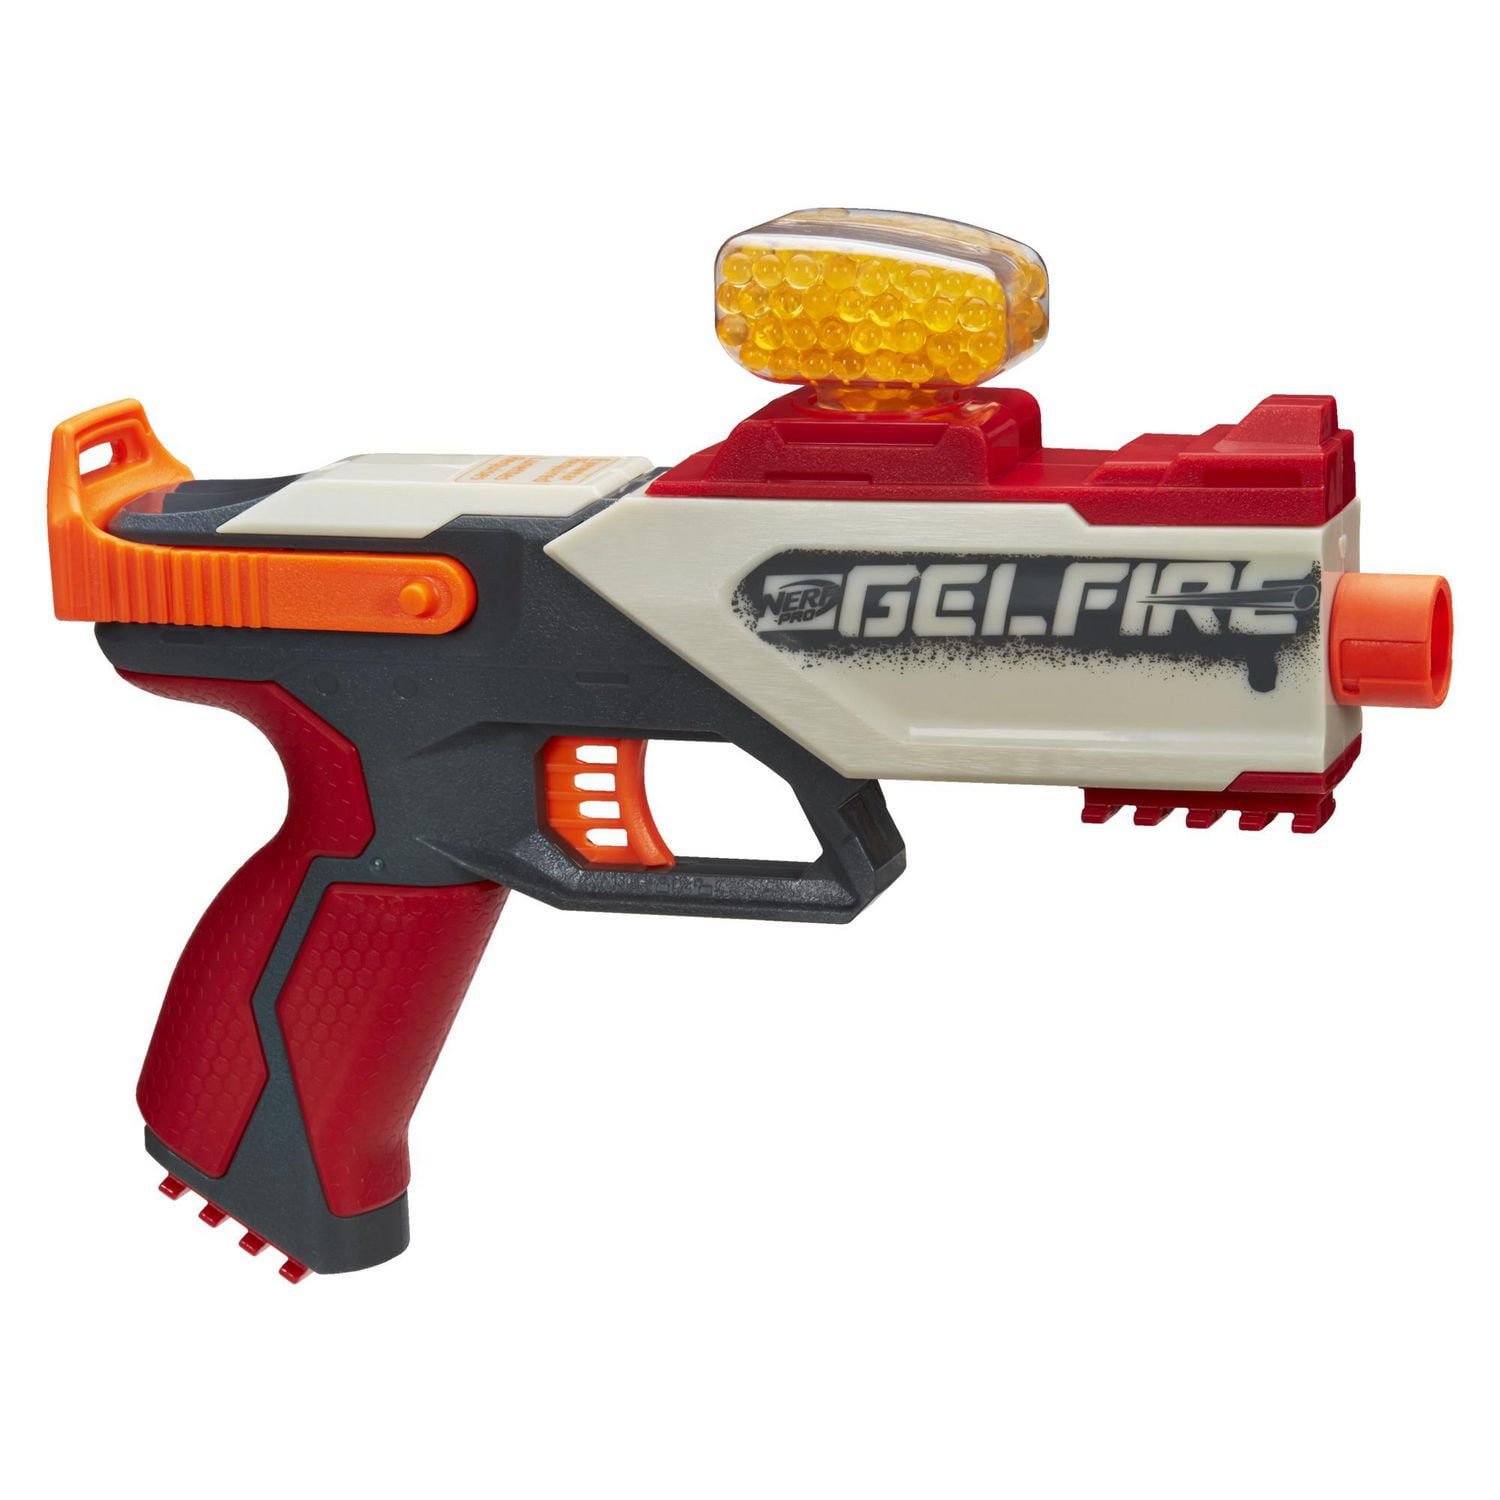 Nerf Pro Gelfire Legion Spring Action Blaster, 5000 Gelfire Rounds, 130  Round Hopper, Protective Eyewear, Slam Fire, Ages 14 & Up, Ages 14 and up 